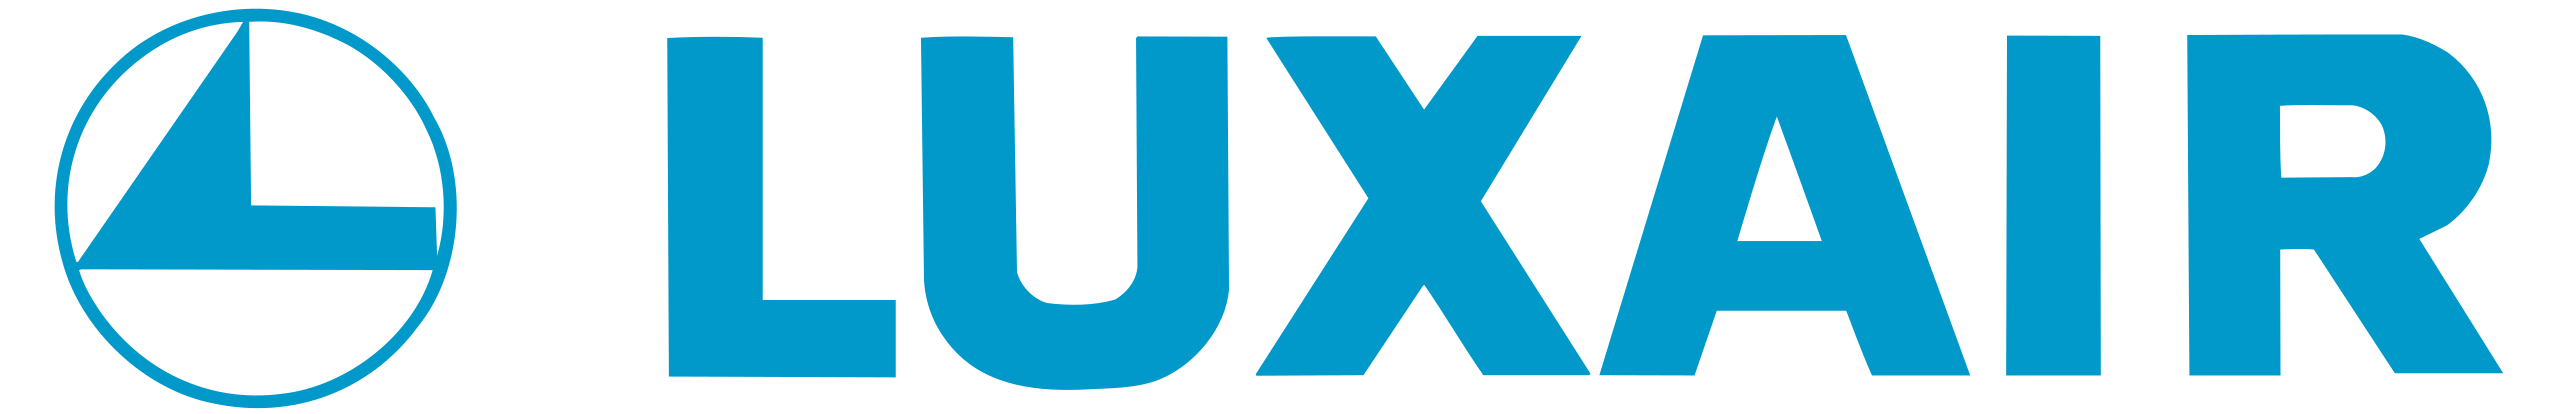 cropped cropped 2560px Luxair Logo.svg 